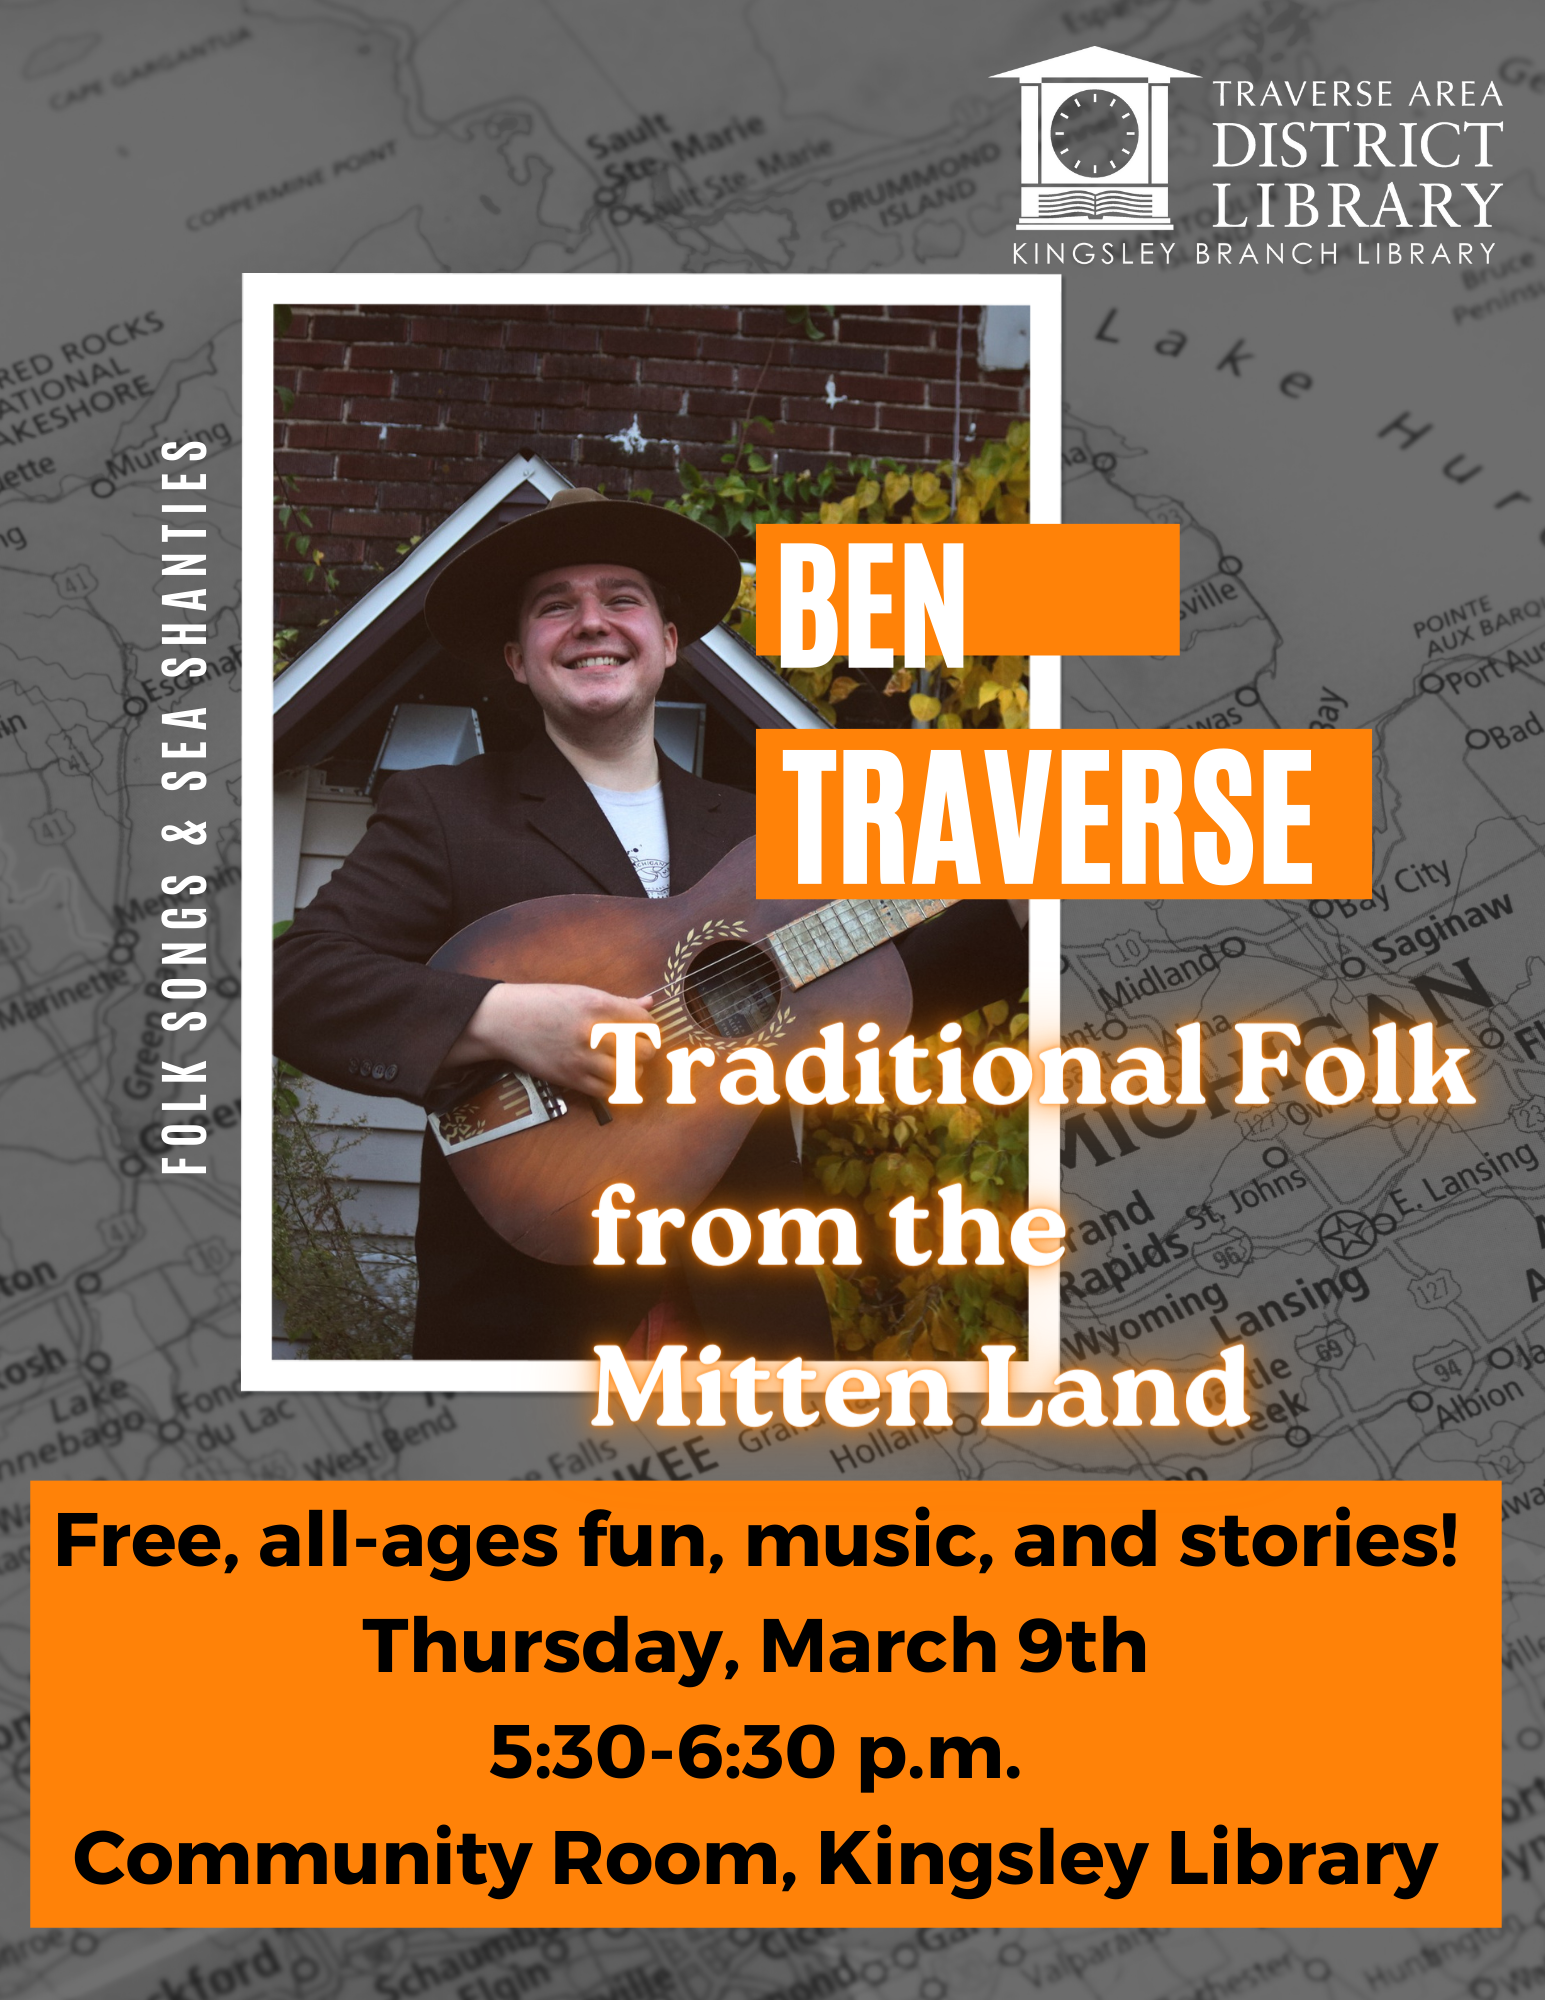 Image of the musician Ben Traverse, with his name super-imposed over the image. Text reads "Ben Traverse: Traditional Folk from the Mitten Land."